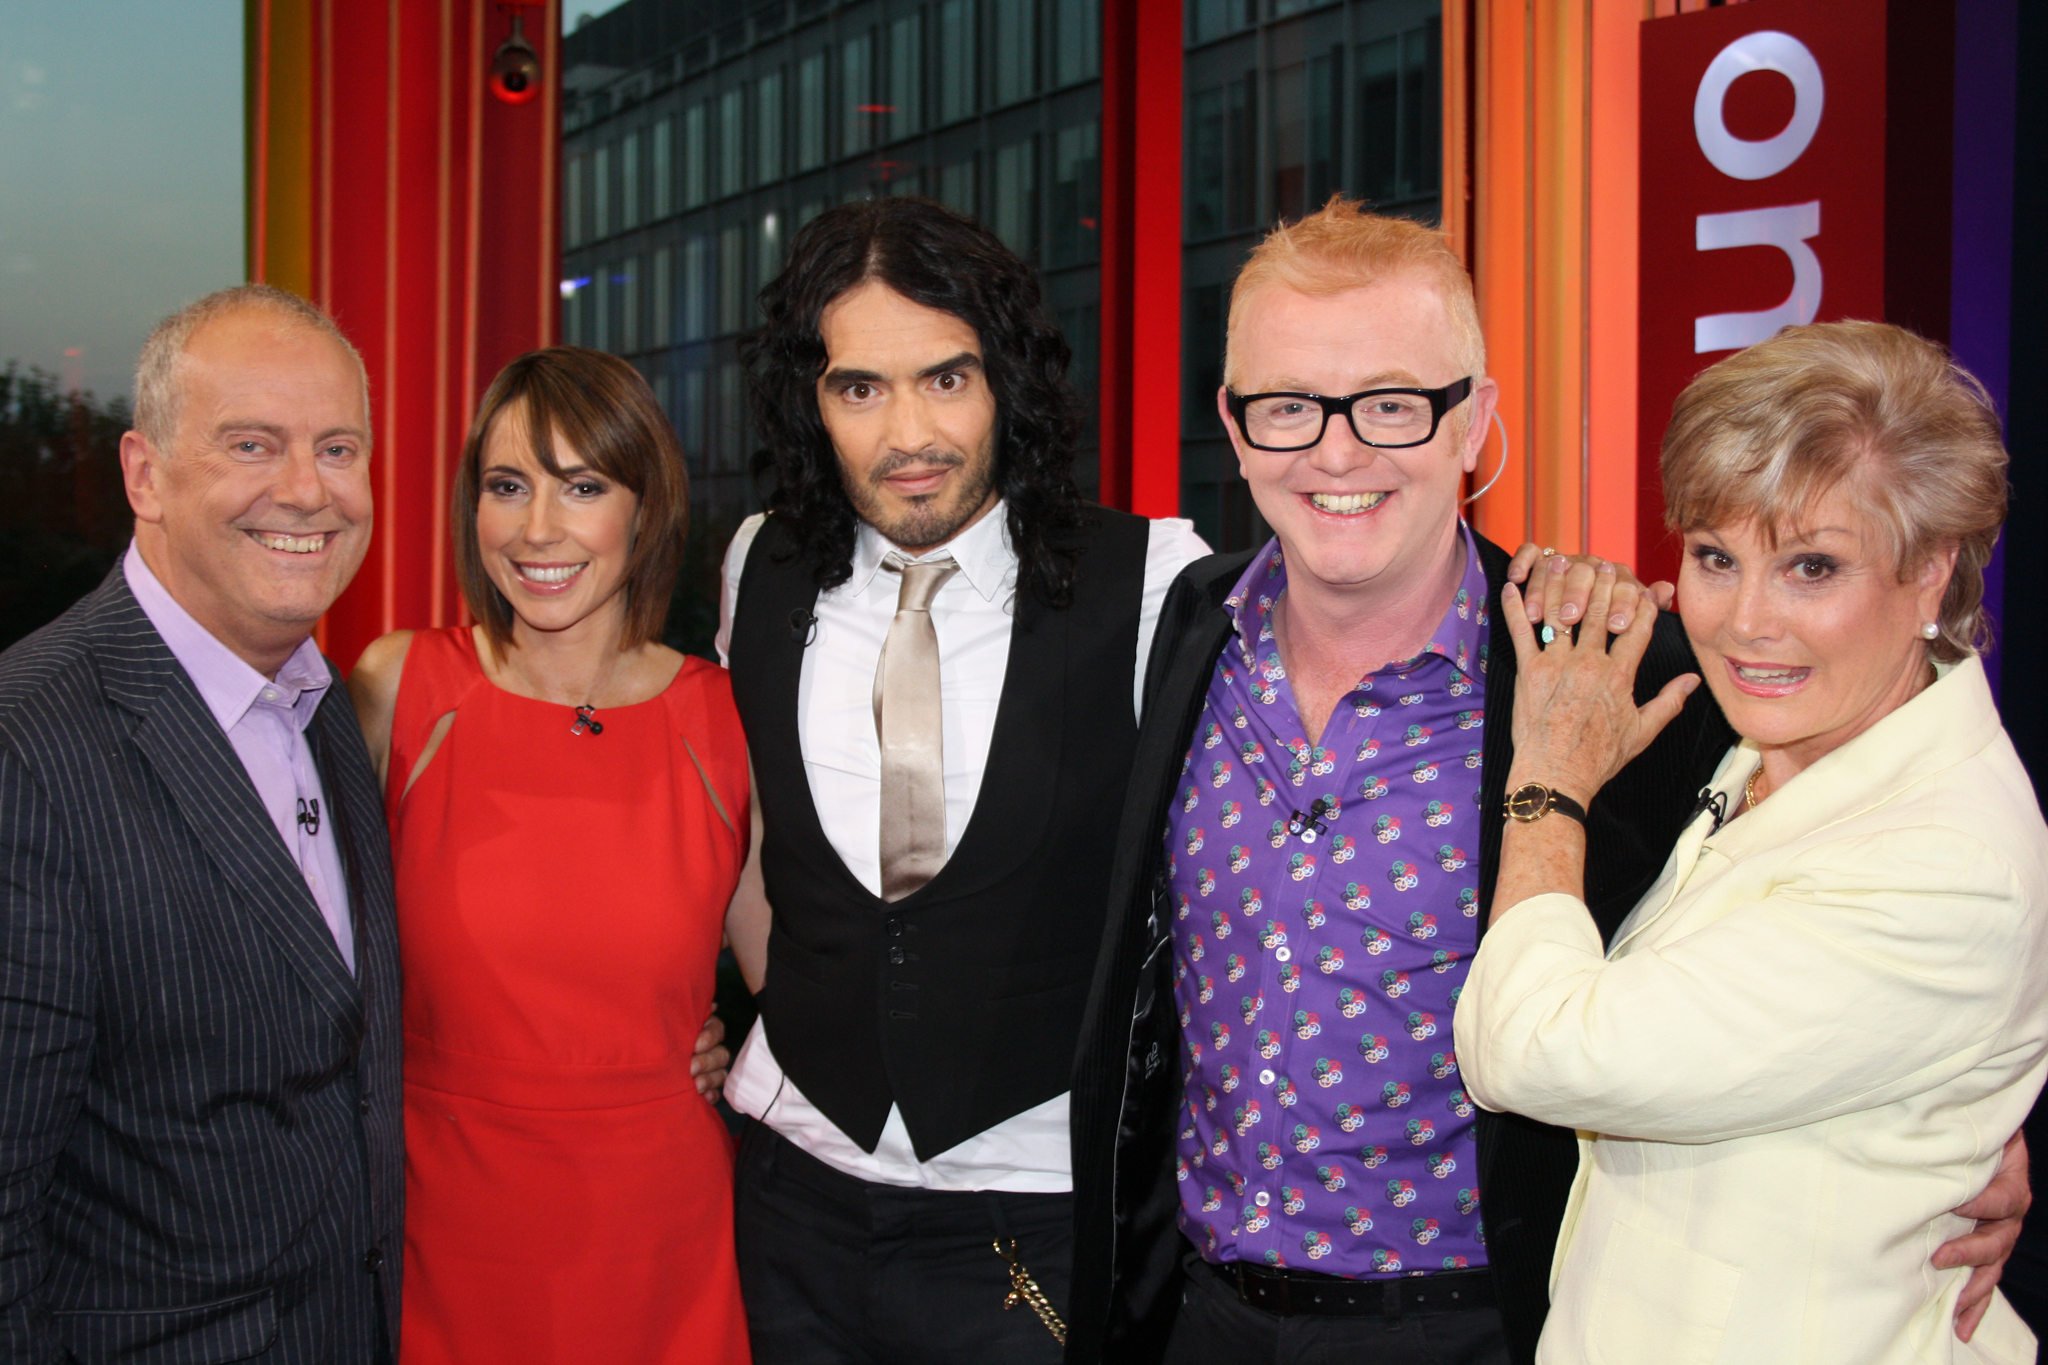 Gyles with Russell Brand, Alex Jones, Chris Evans and Angela Rippon on The One Show, April 2011